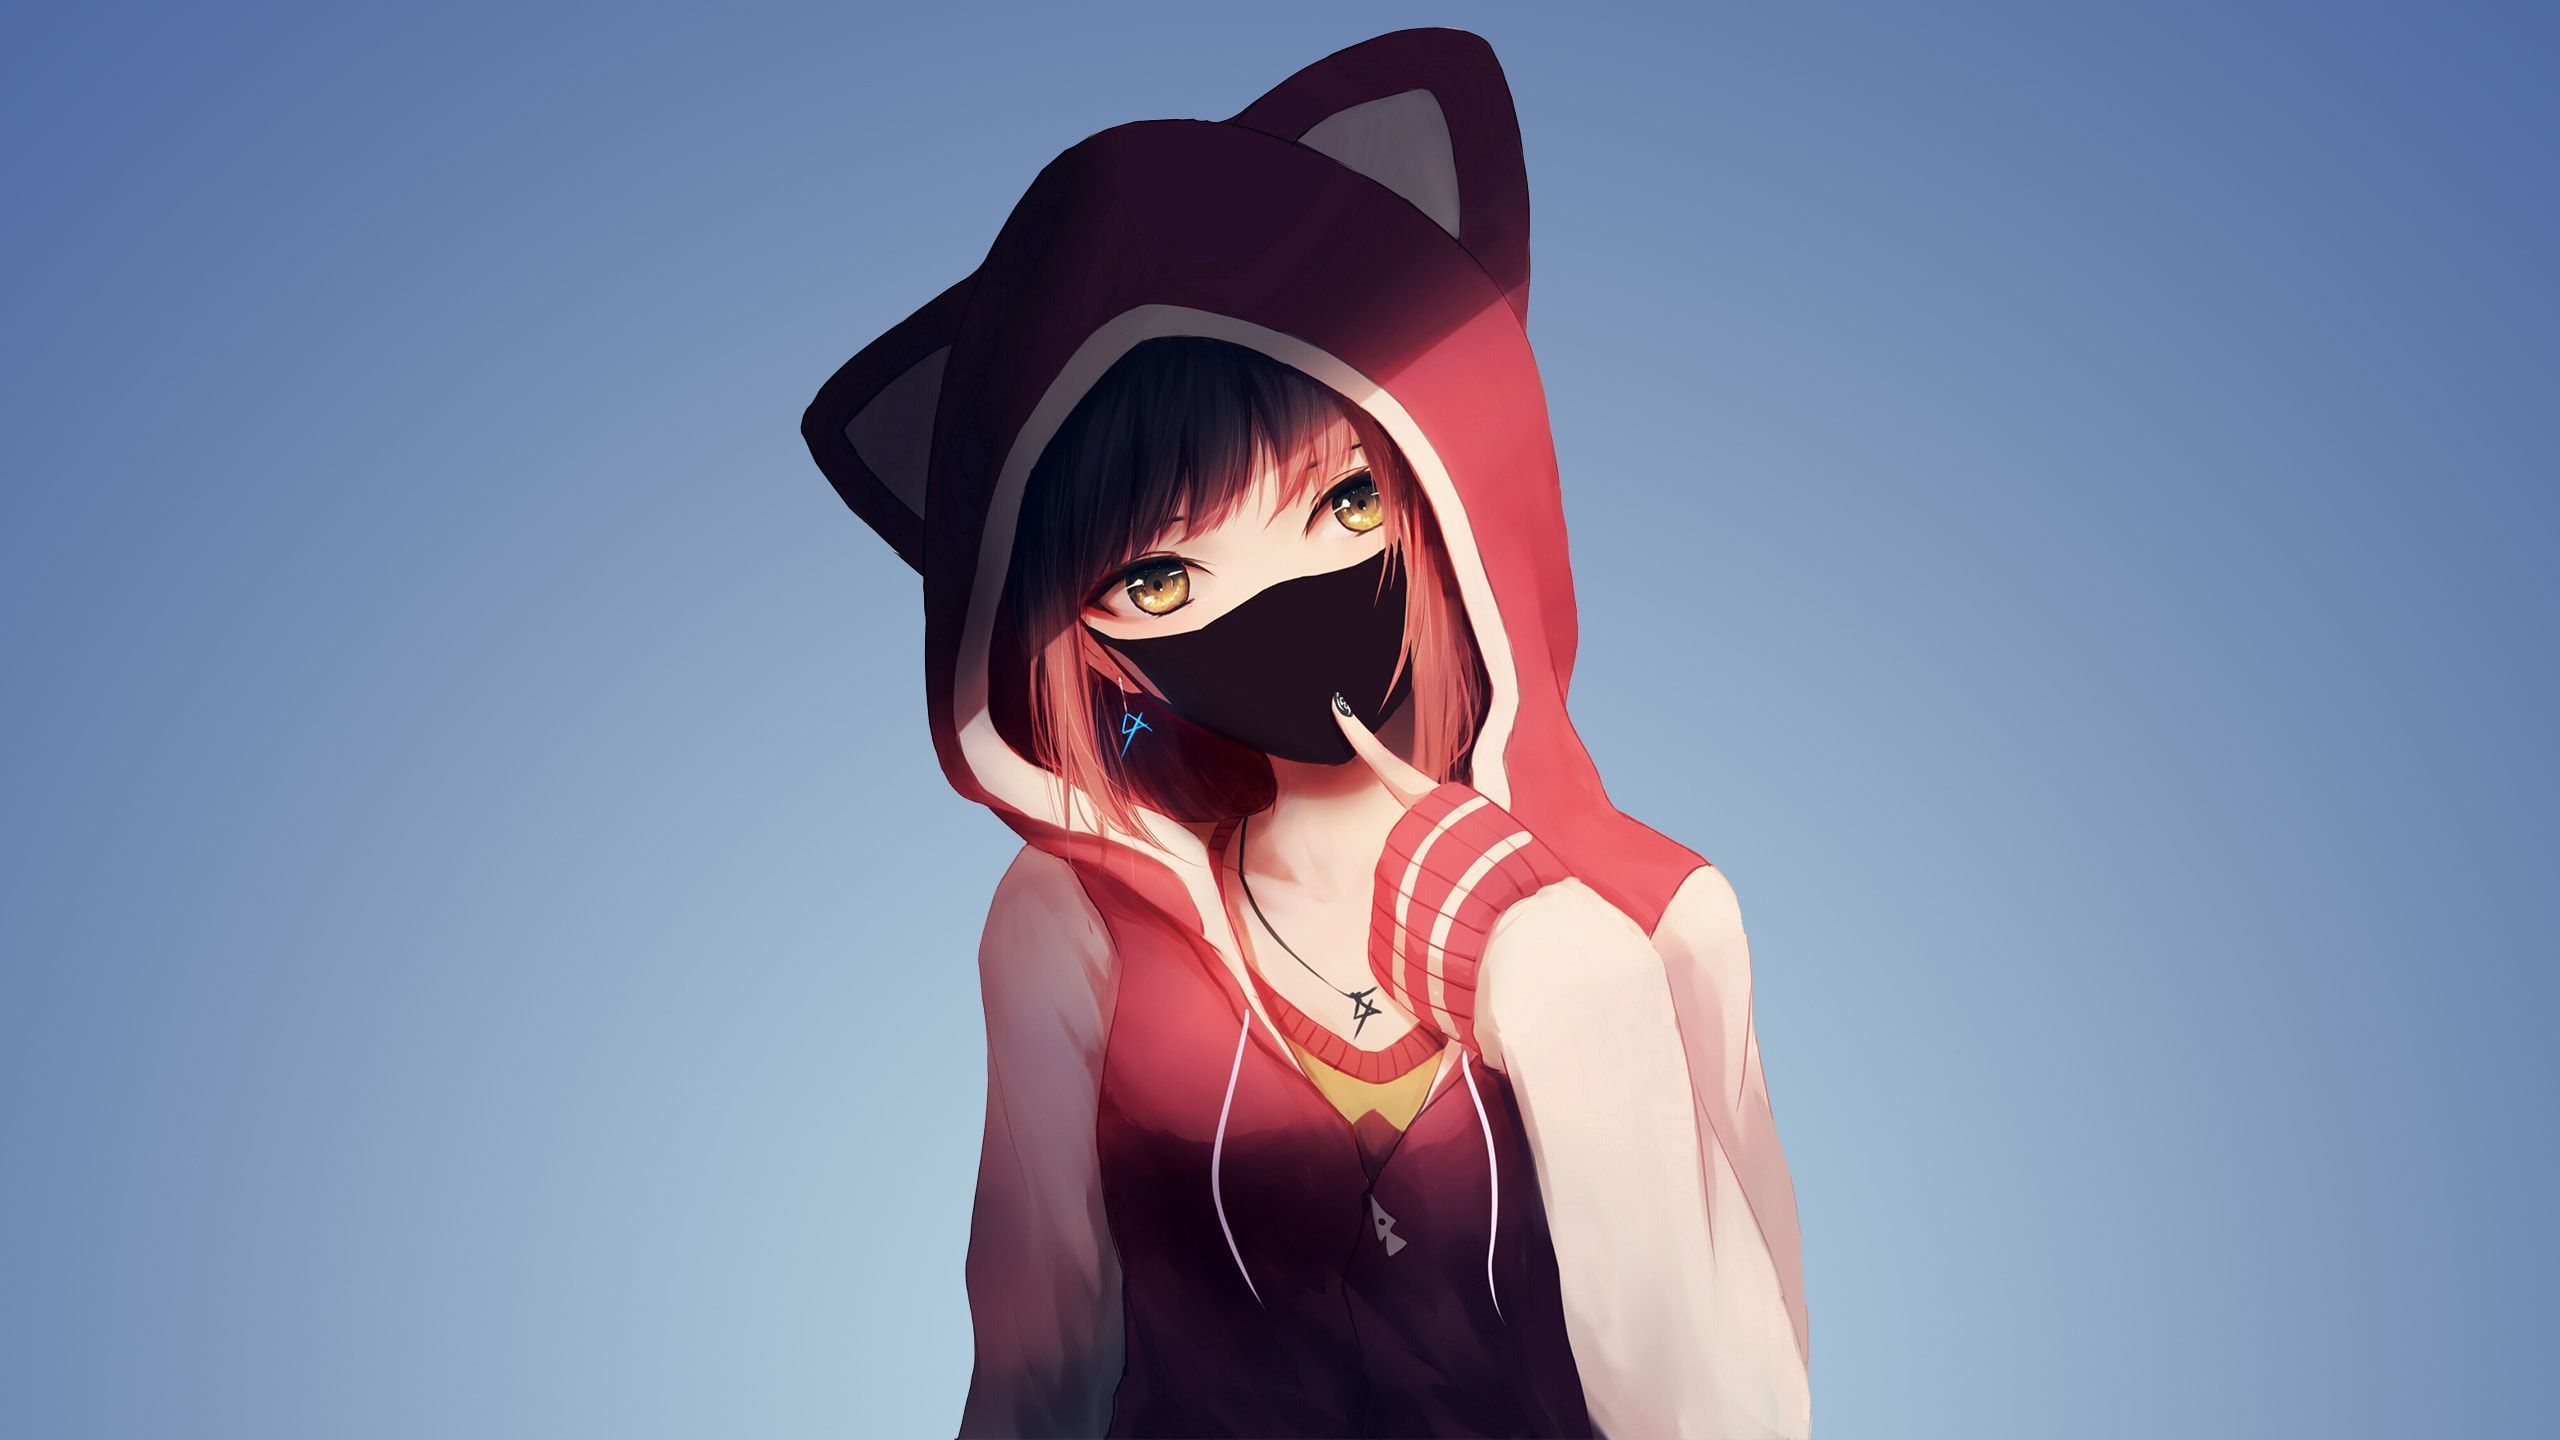 Download wallpaper 950x1534 anime girl in hoodie mask original iphone  950x1534 hd background 6571